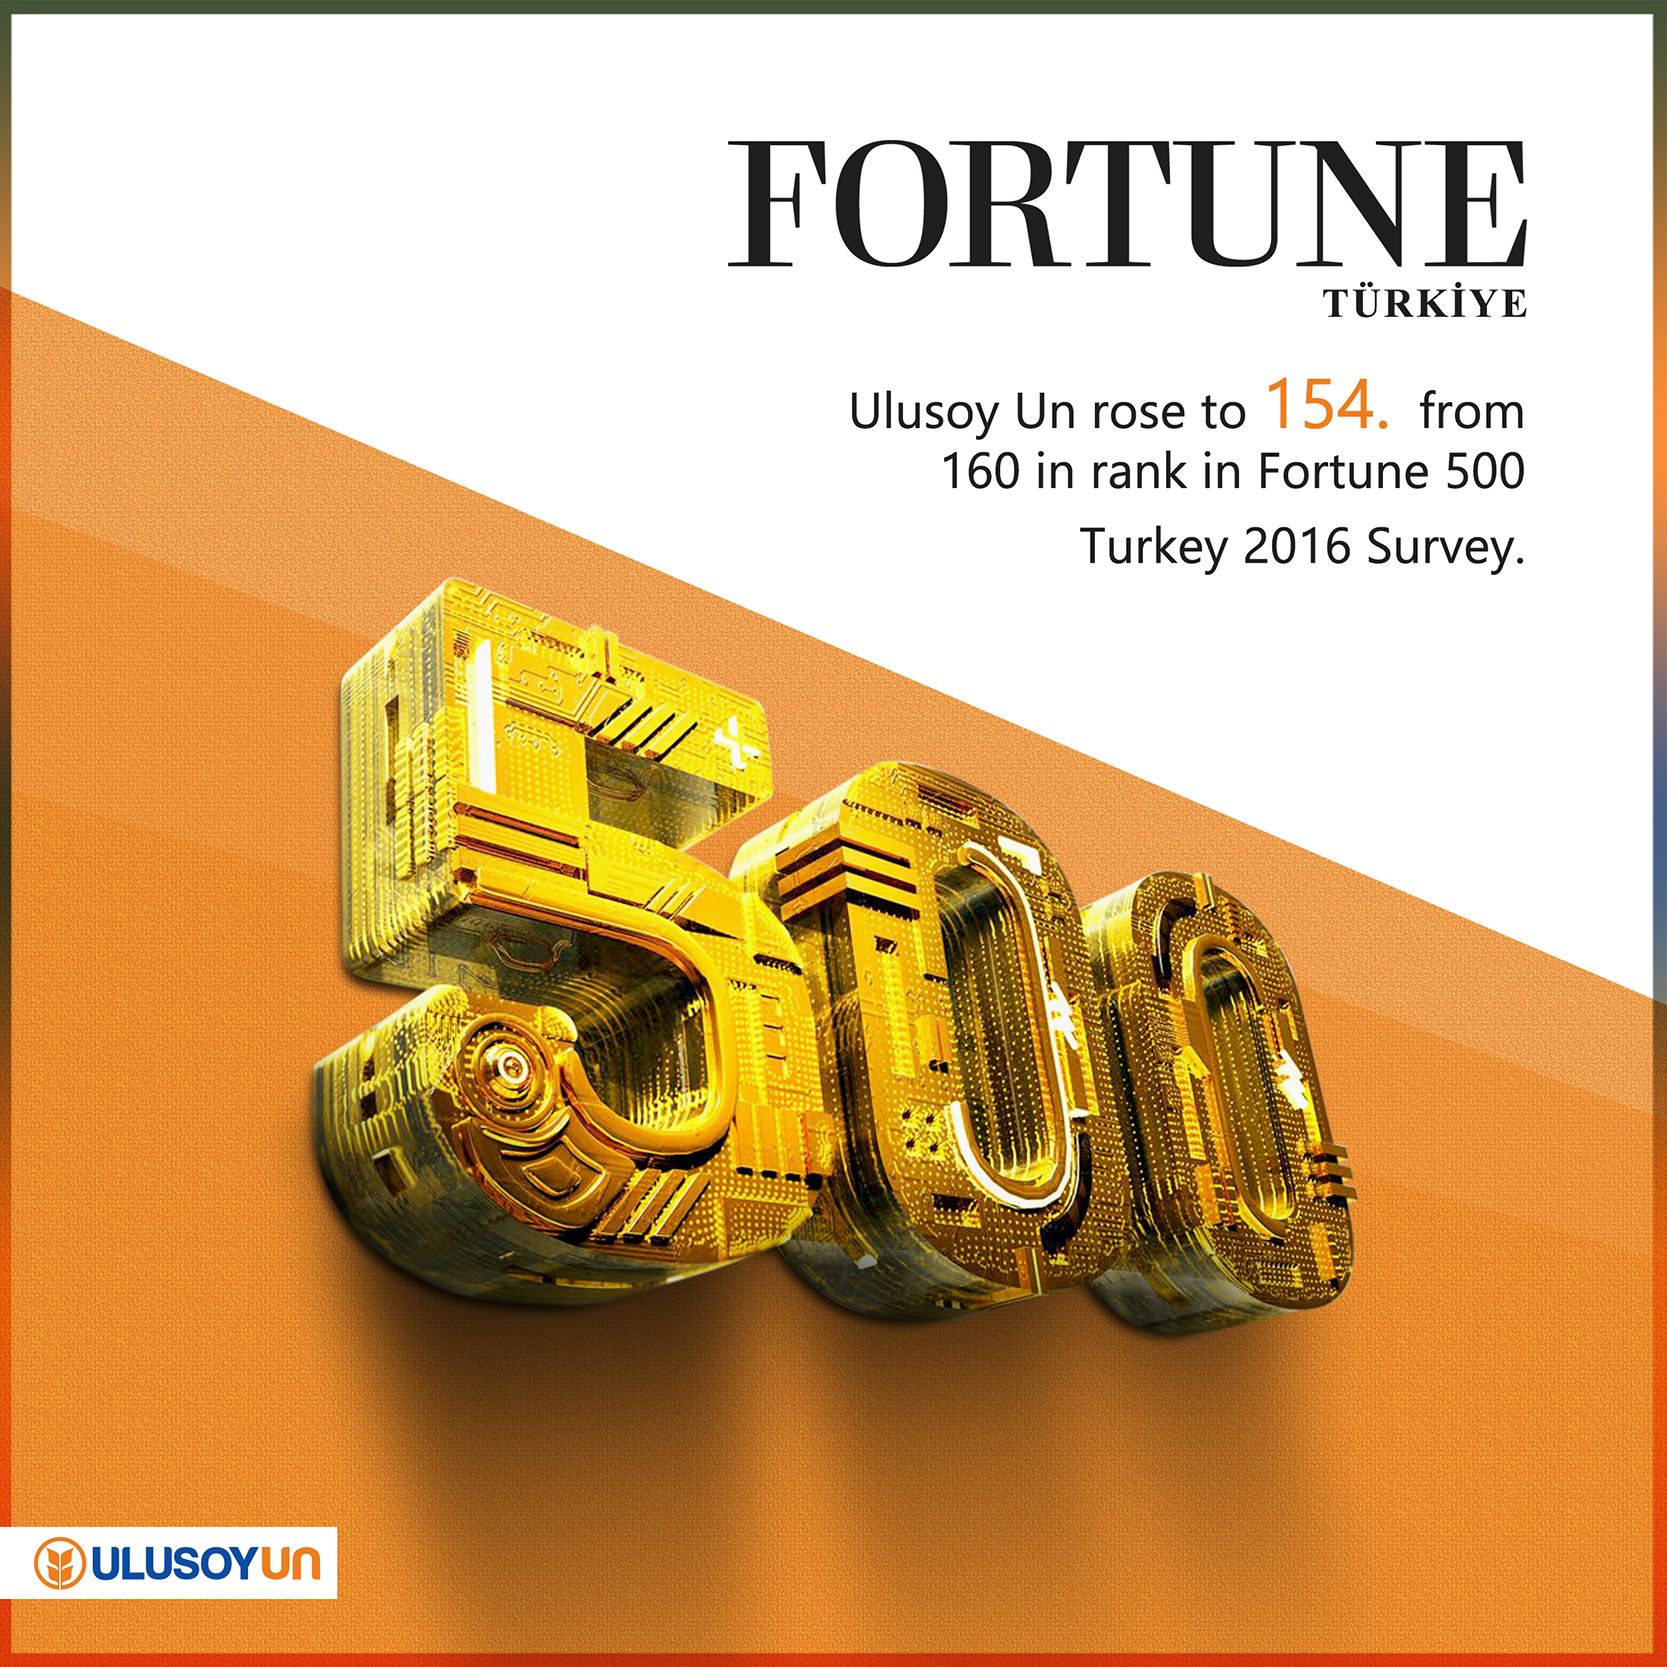 Fortune 2016, Ulusoy Un